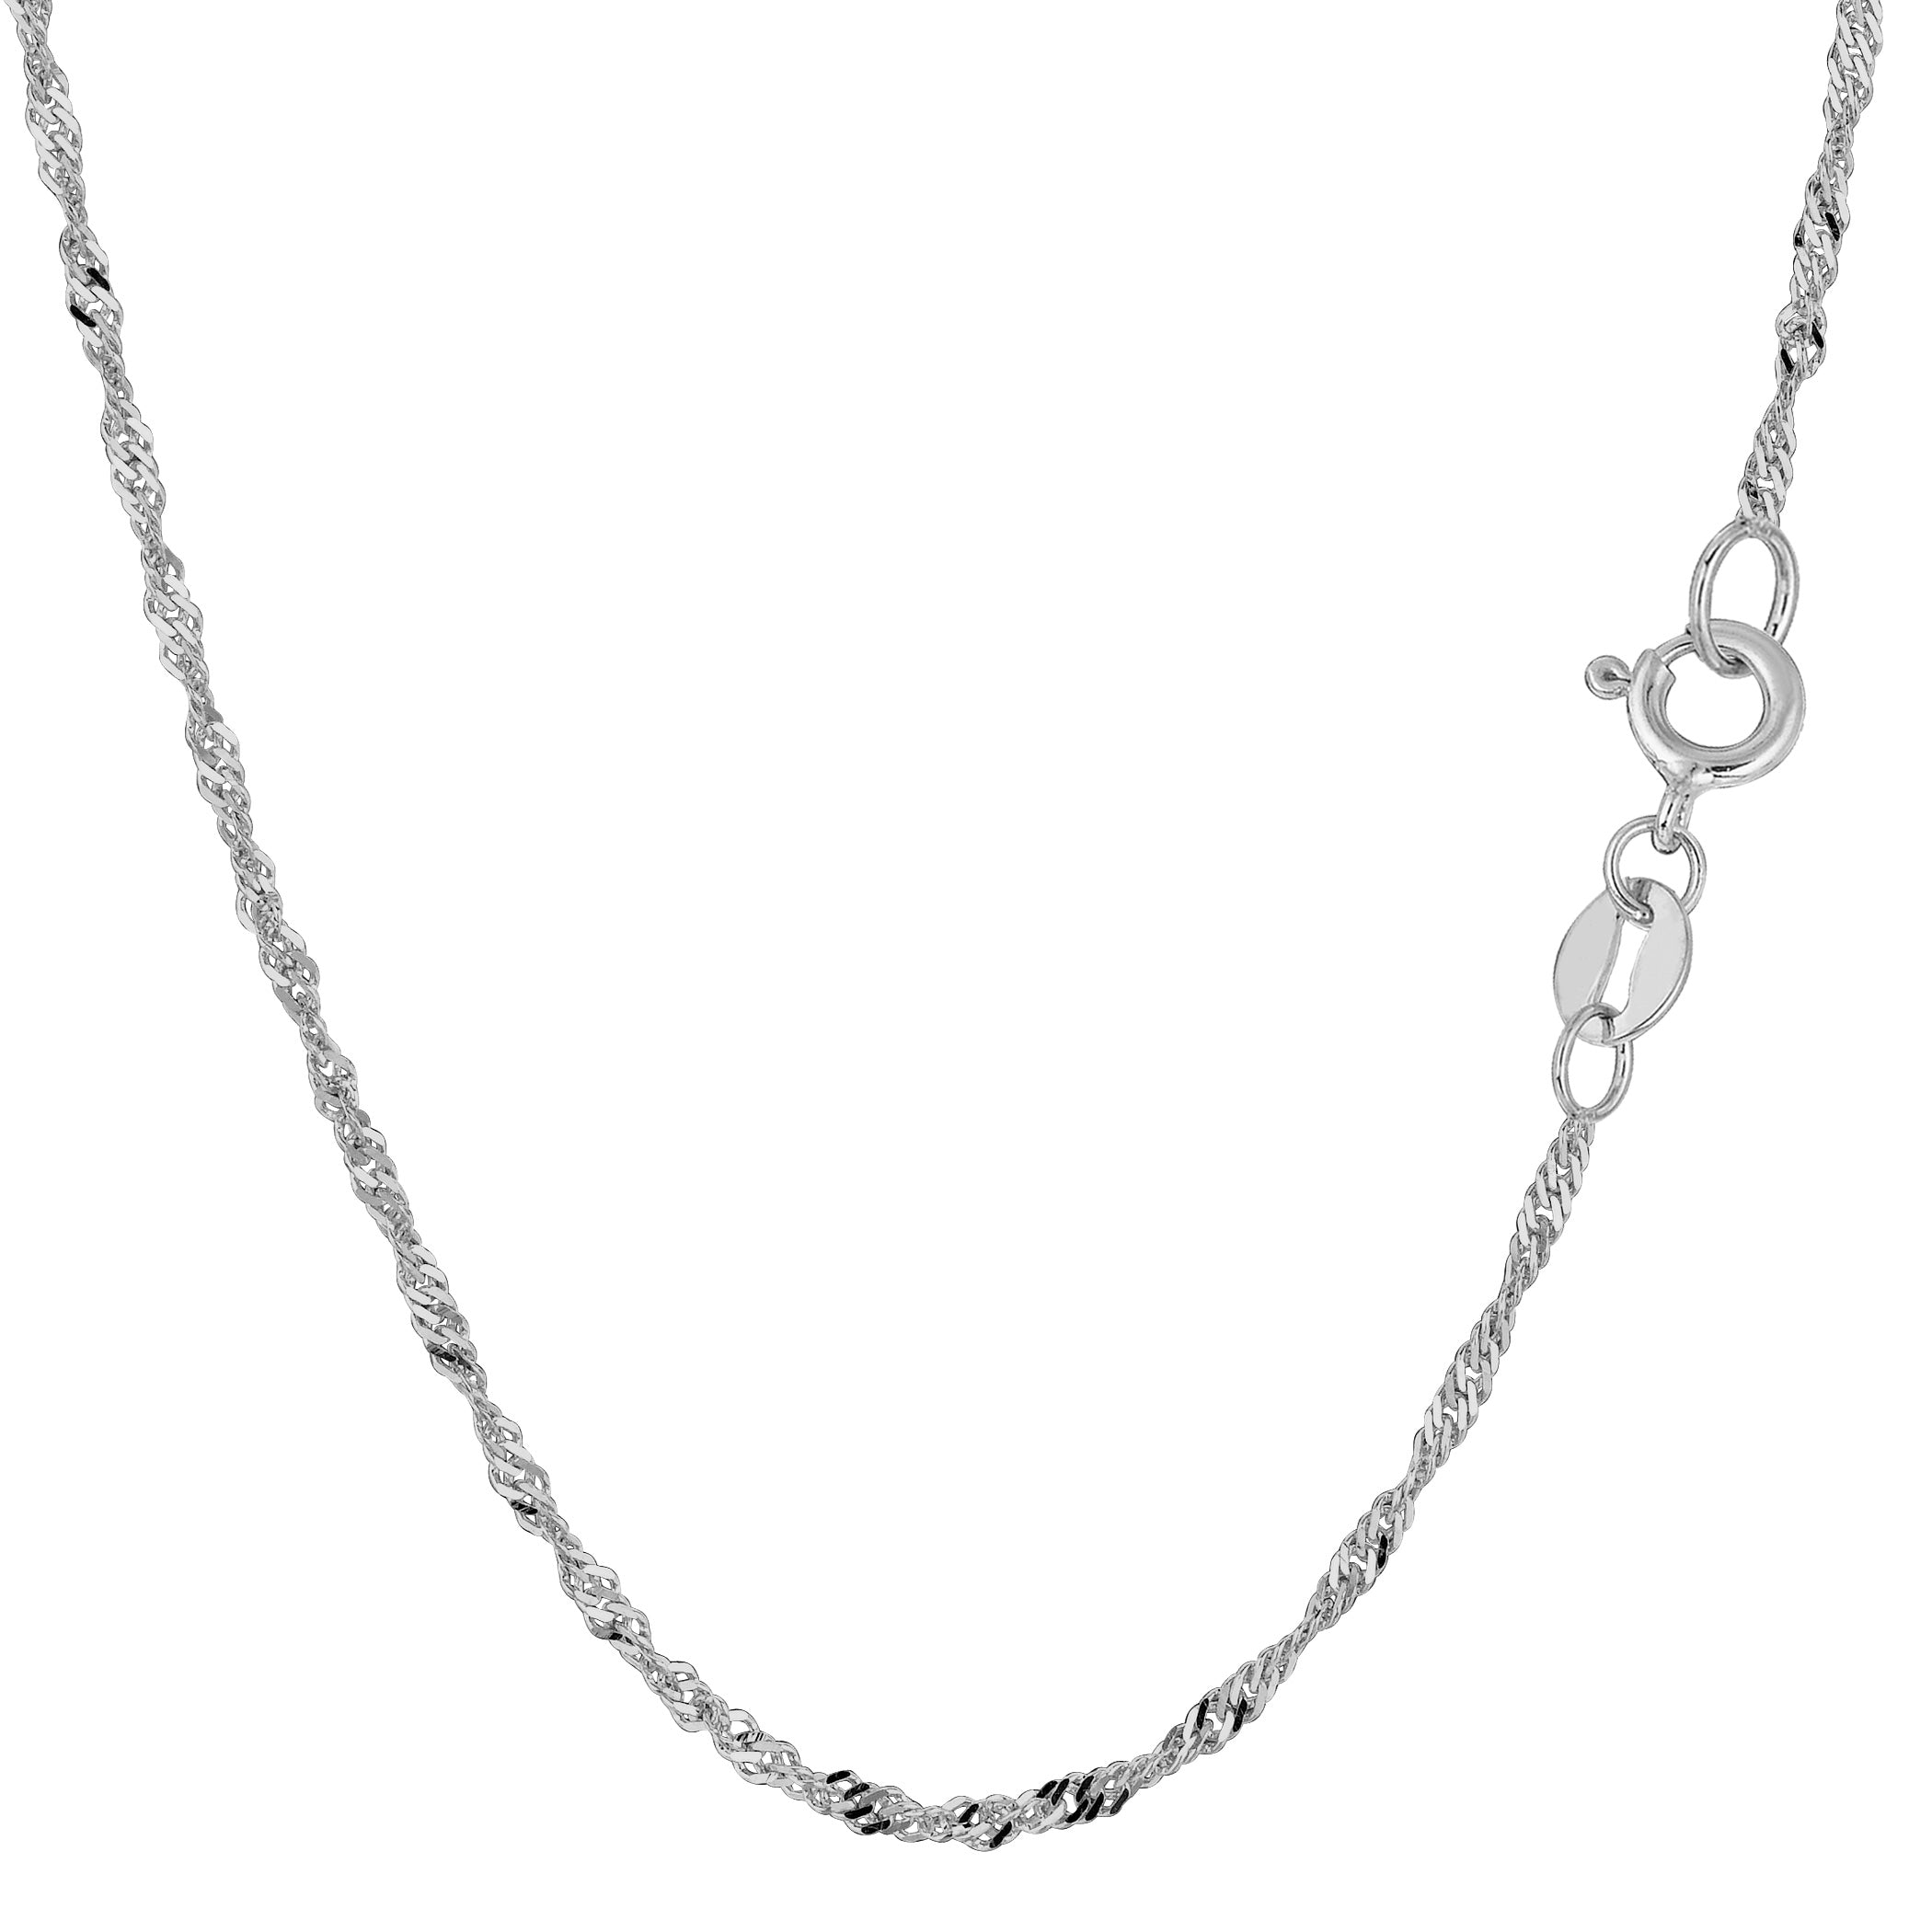 10k White Gold Singapore Chain Necklace, 1.7mm fine designer jewelry for men and women